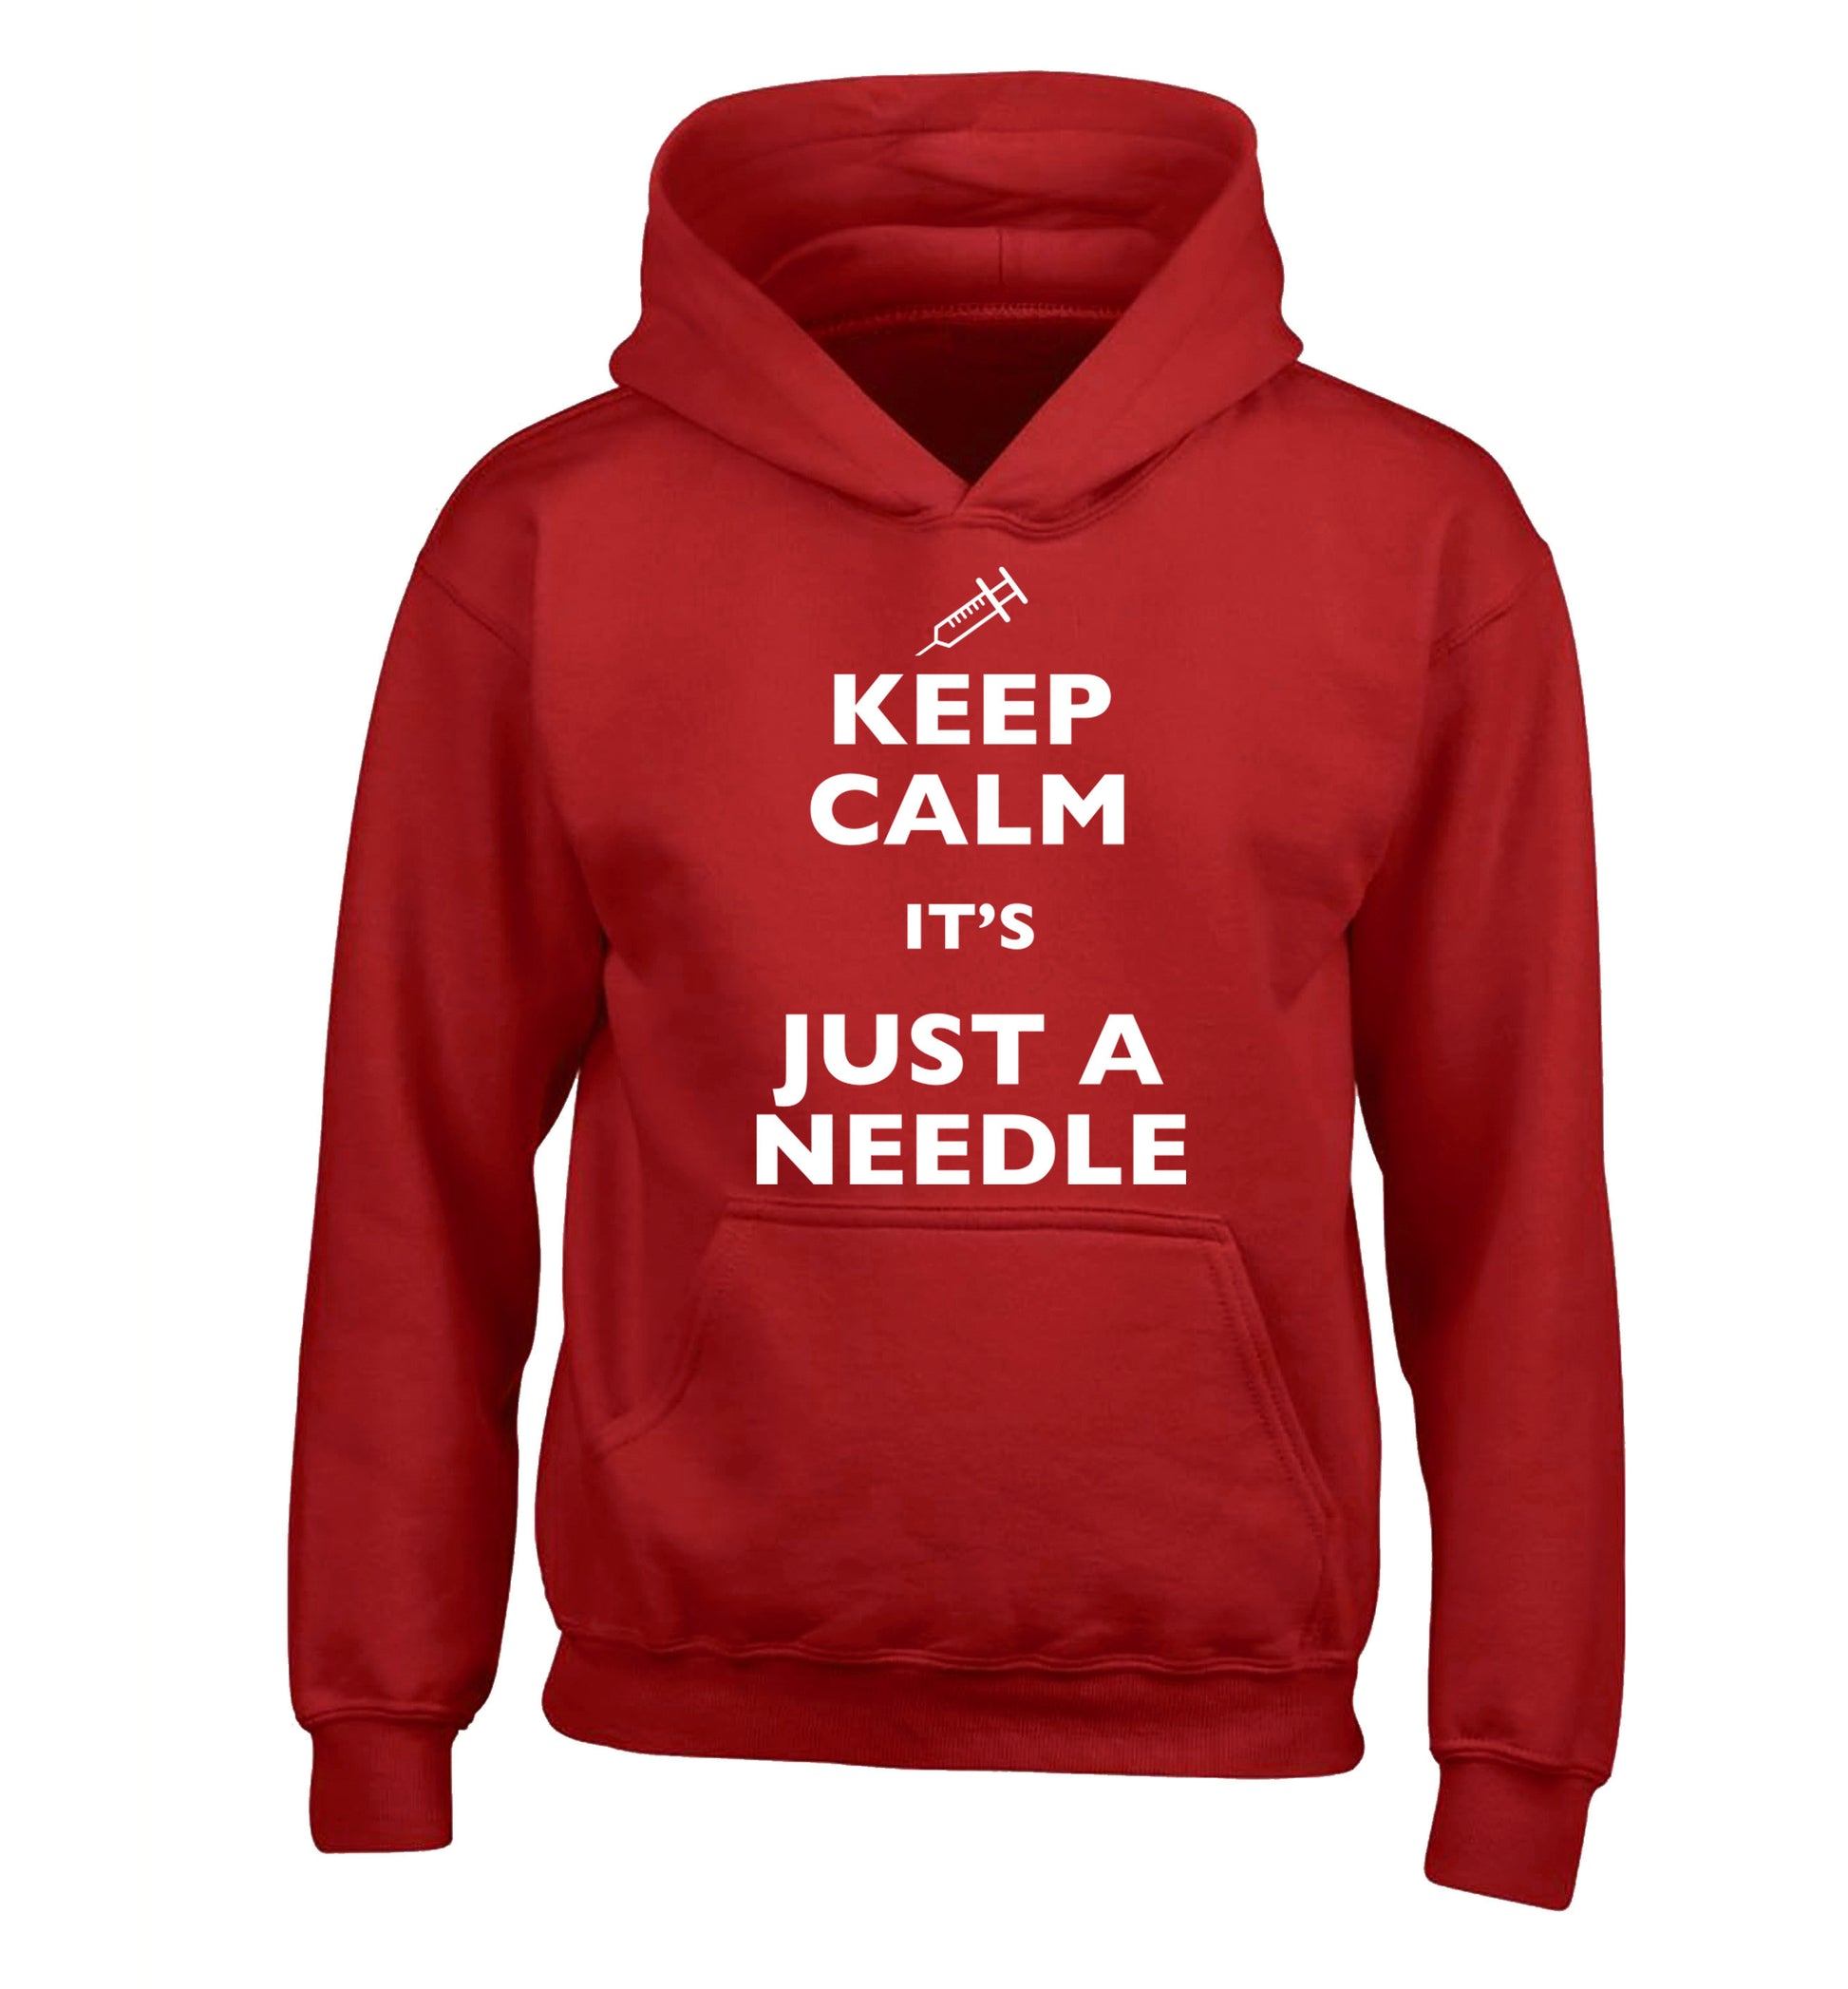 Keep calm it's only a needle children's red hoodie 12-14 Years